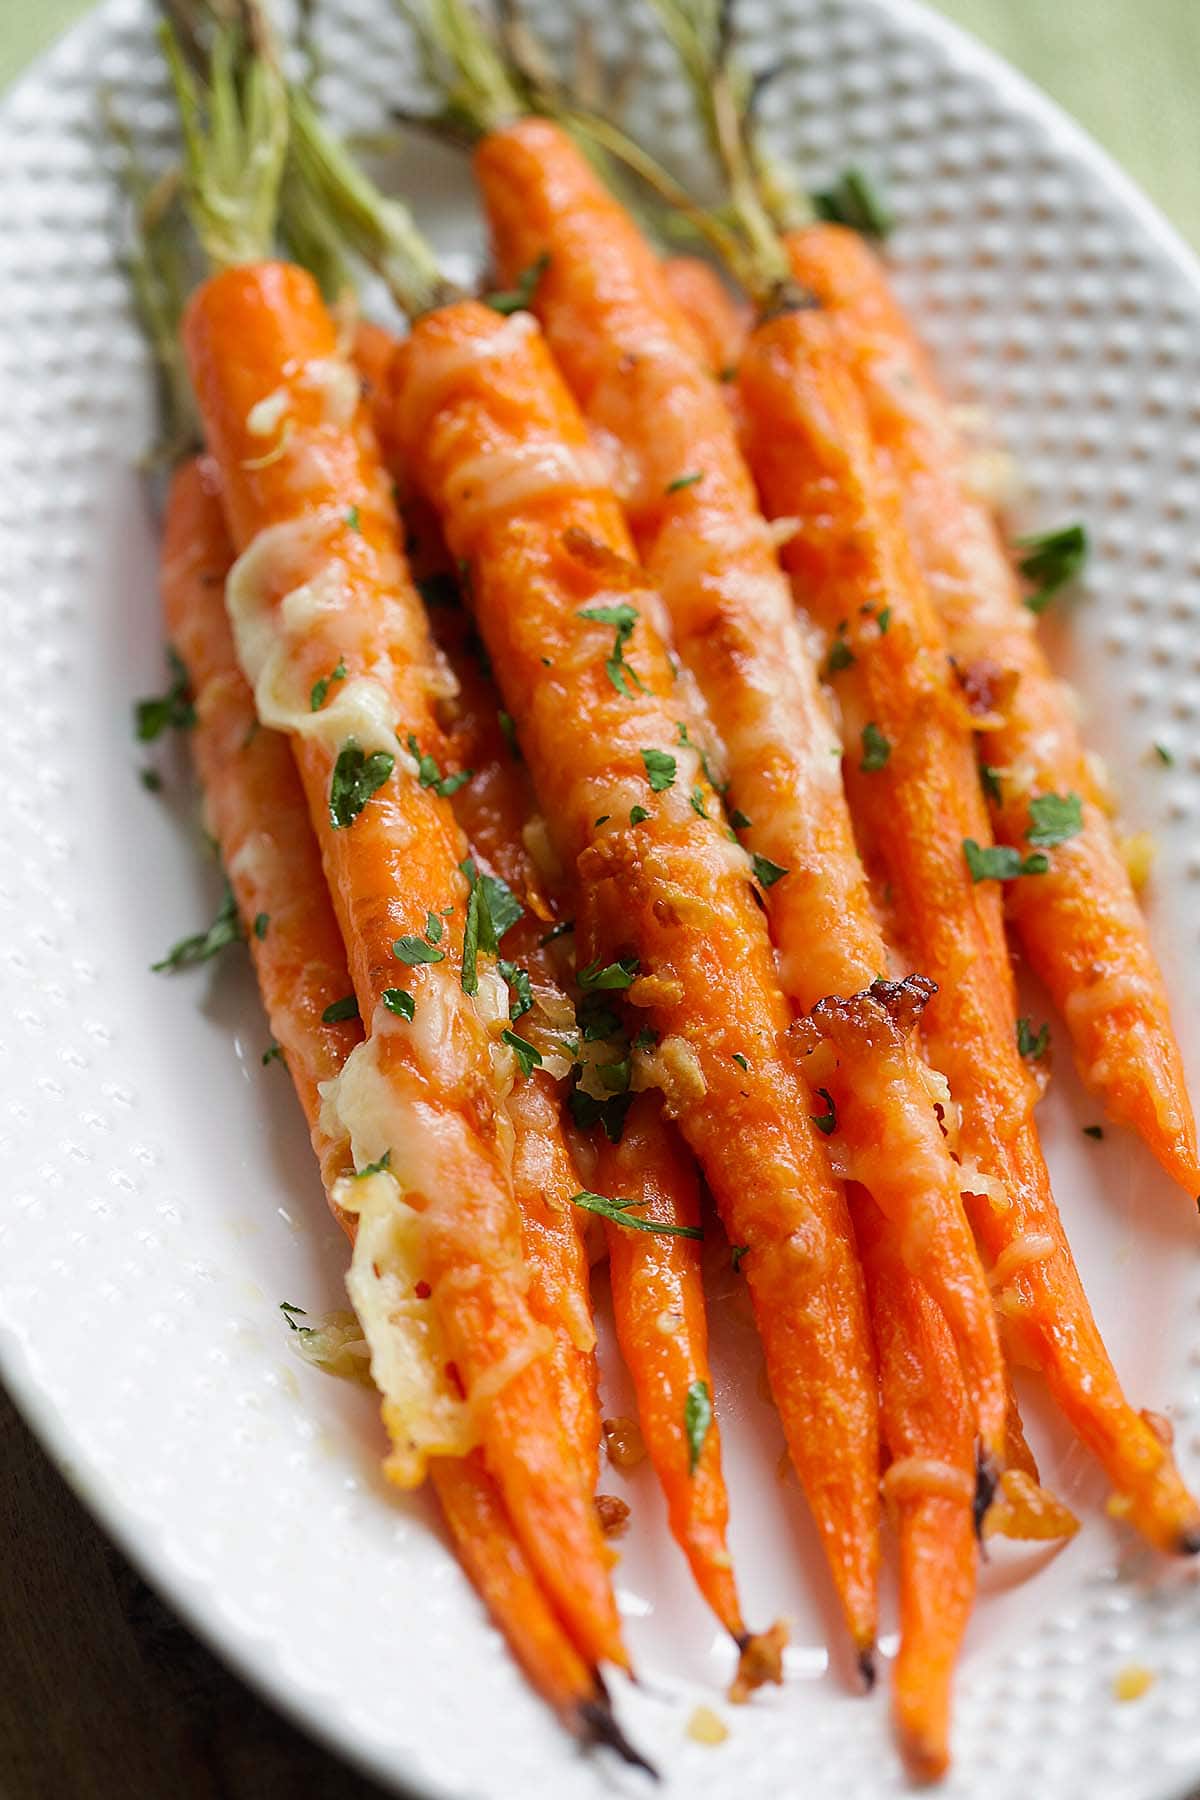 One of the best roasted carrot recipes made with carrot tops, garlic, butter and Parmesan cheese on a plate.